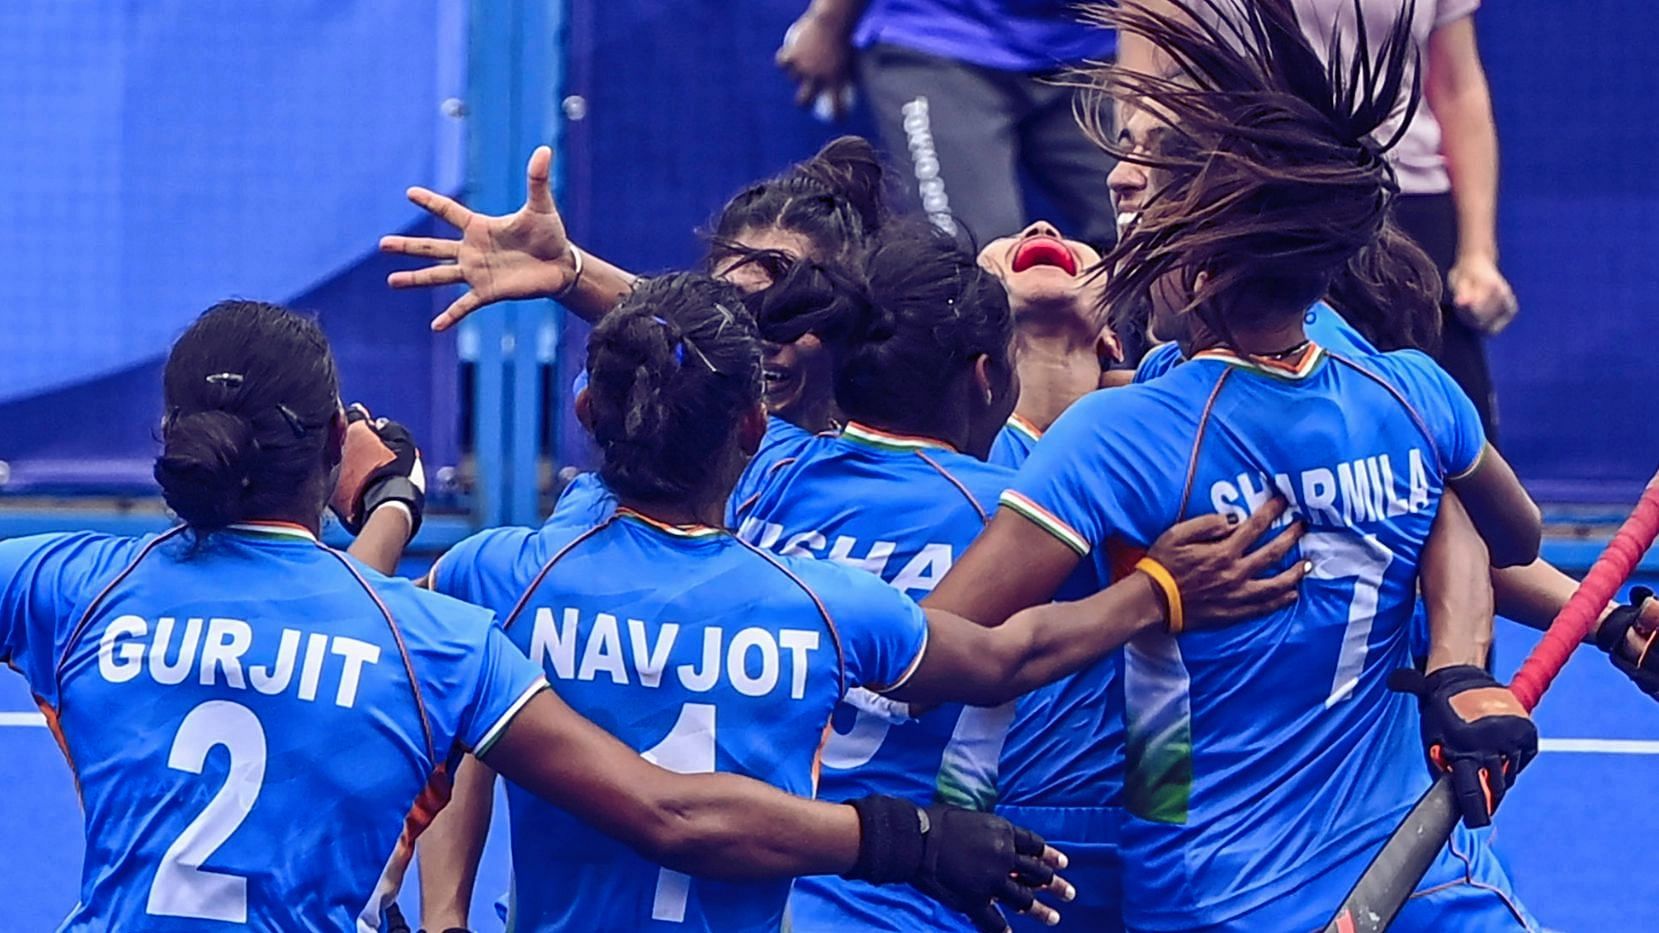 <div class="paragraphs"><p>From the coach to his players, every member of the Indian women's hockey team has had to face some struggle to reach where they are.</p></div>